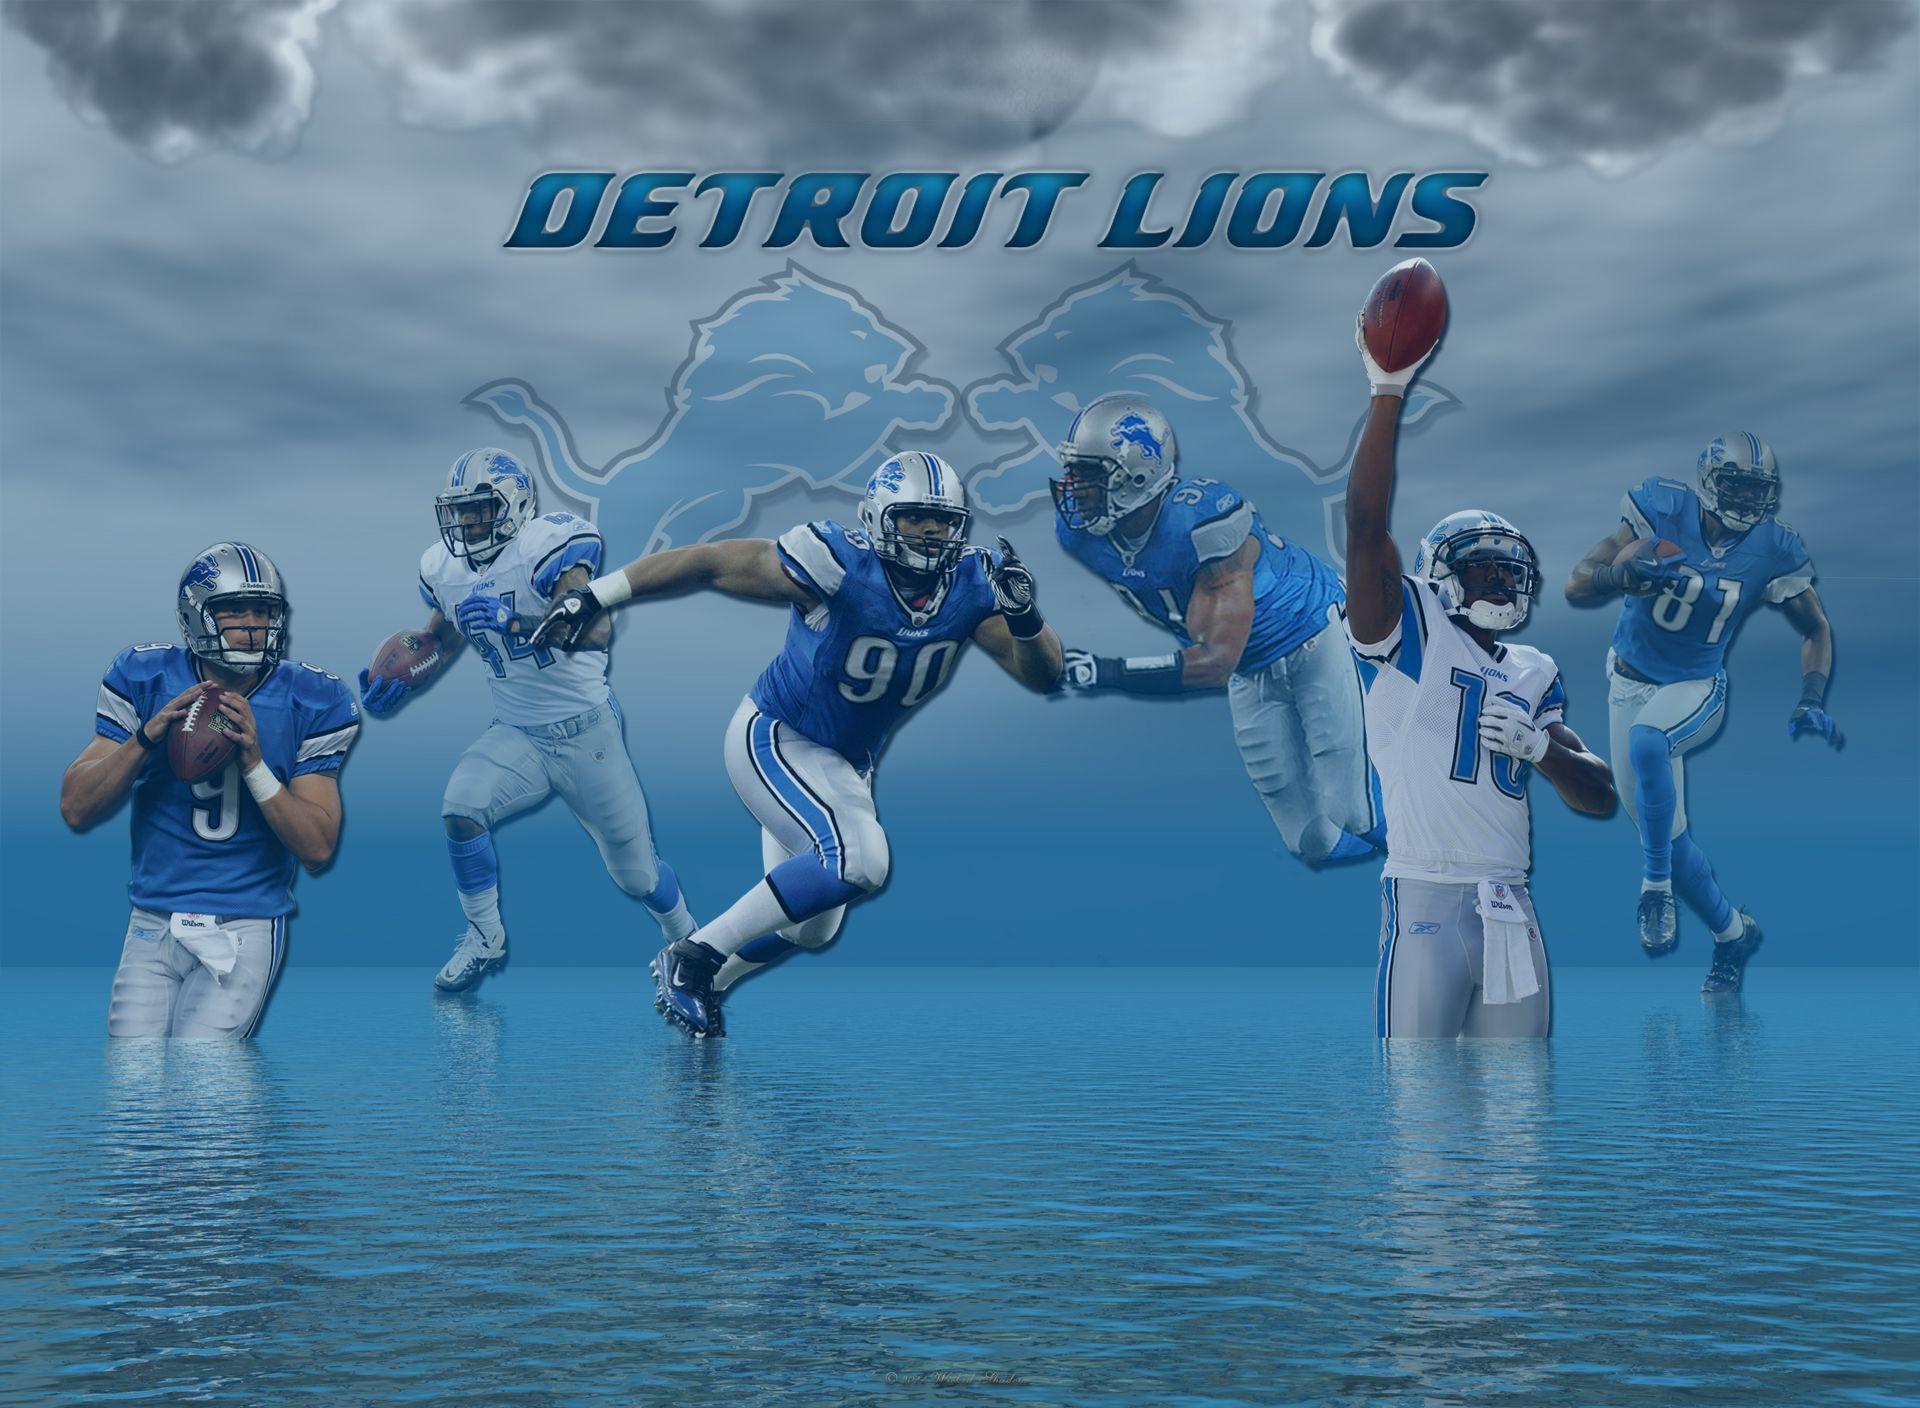 Wallpaper By Wicked Shadows: Detroit Lions NFL wallpaper